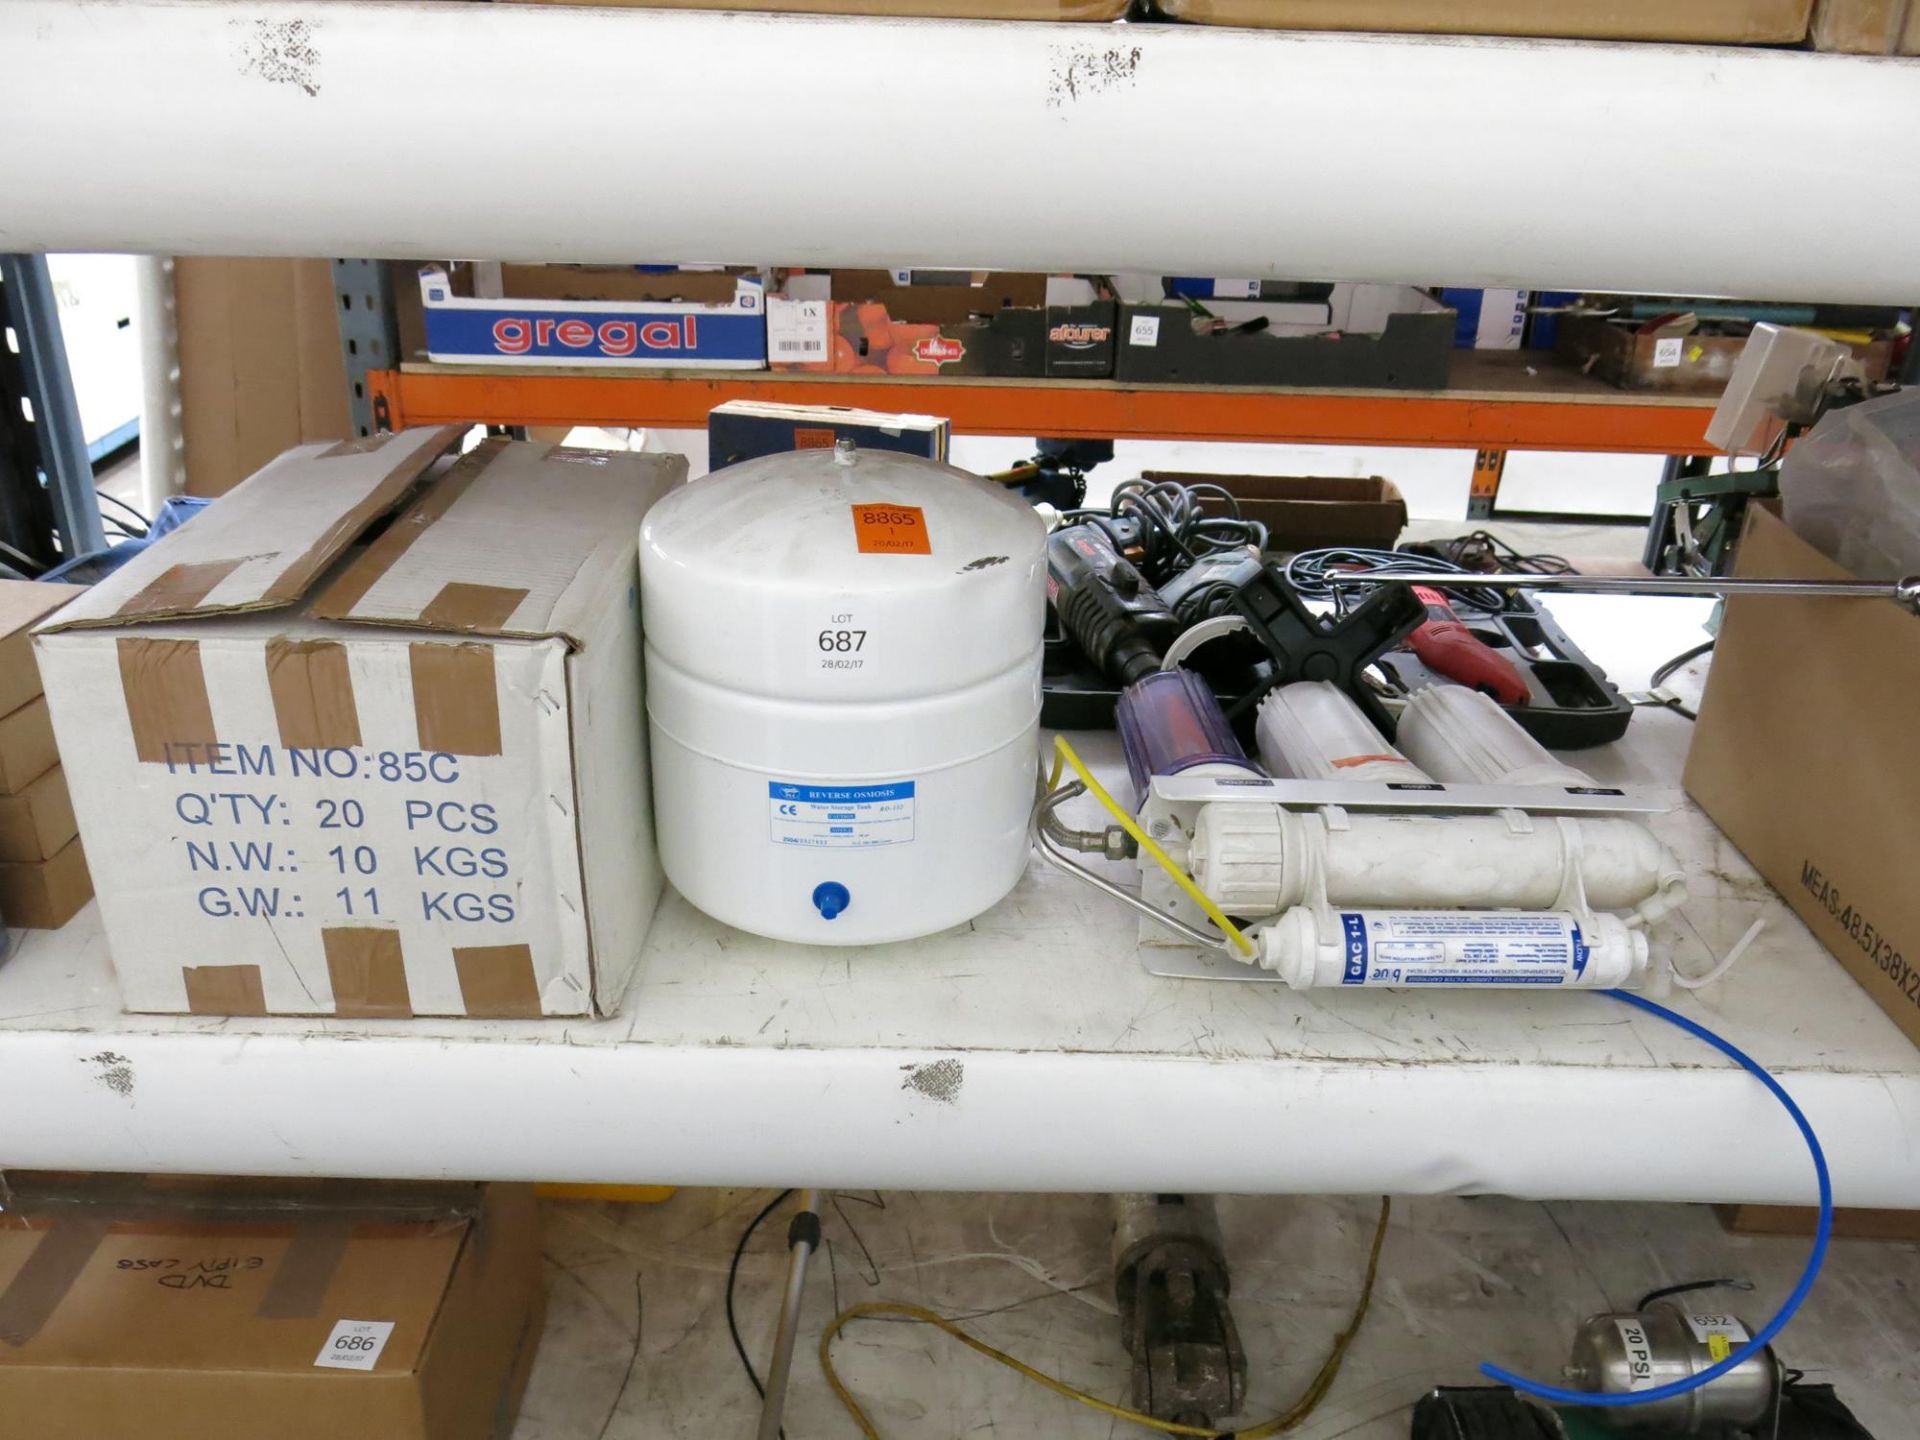 A reverse osmosis filtration system c/w extra filters